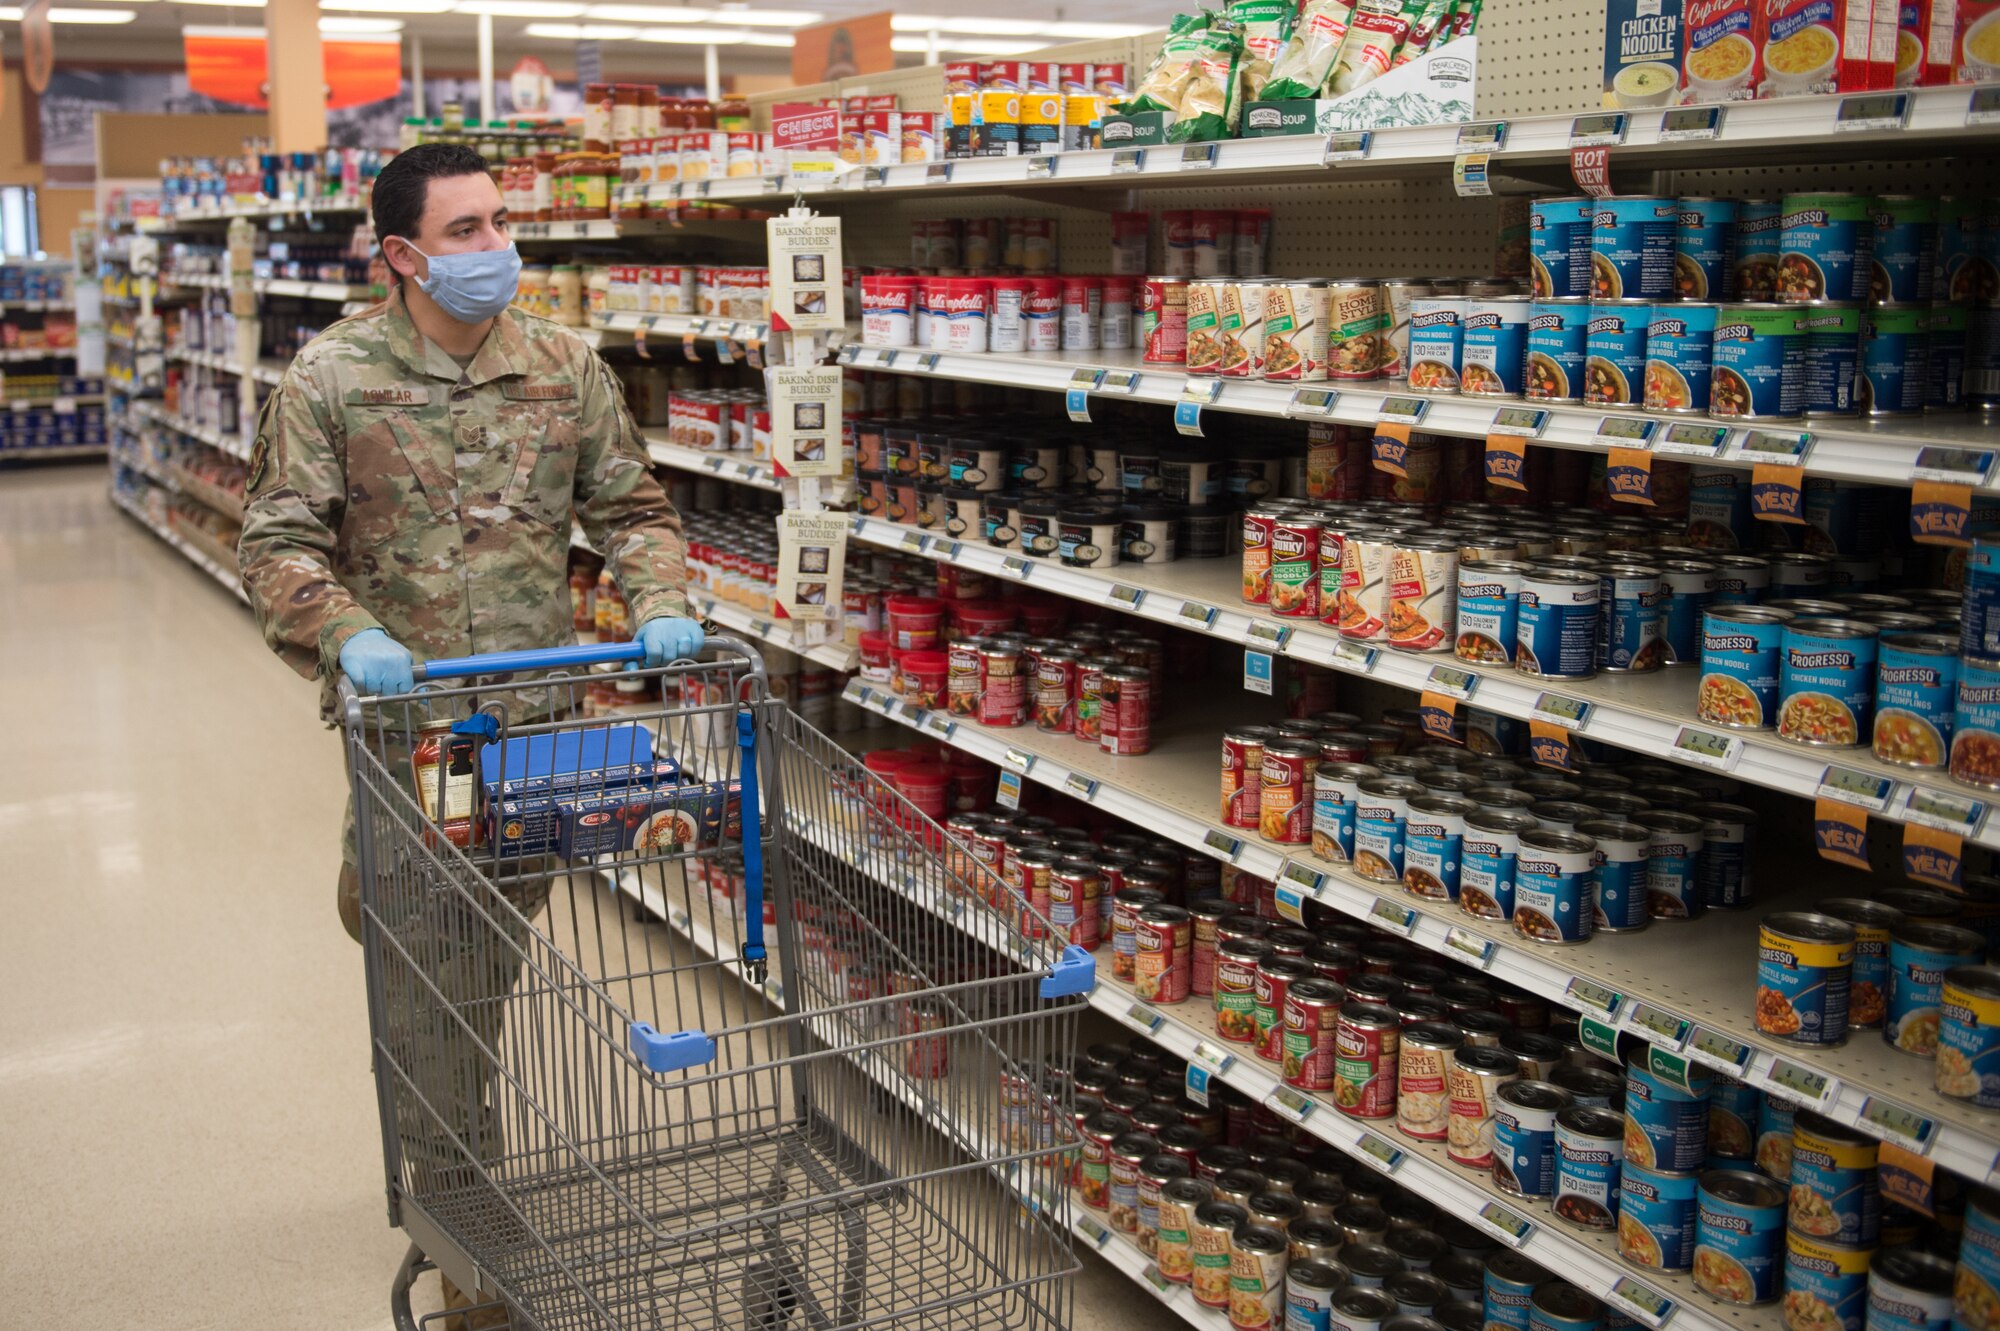 Tech. Sgt. Justin Aguilar, logistics test and evaluator, 412th Maintenance Logistics Test Squadron, shops for essentials at the Edwards Air Force Base commissary, April 22.  (Photo by Christian Turner)